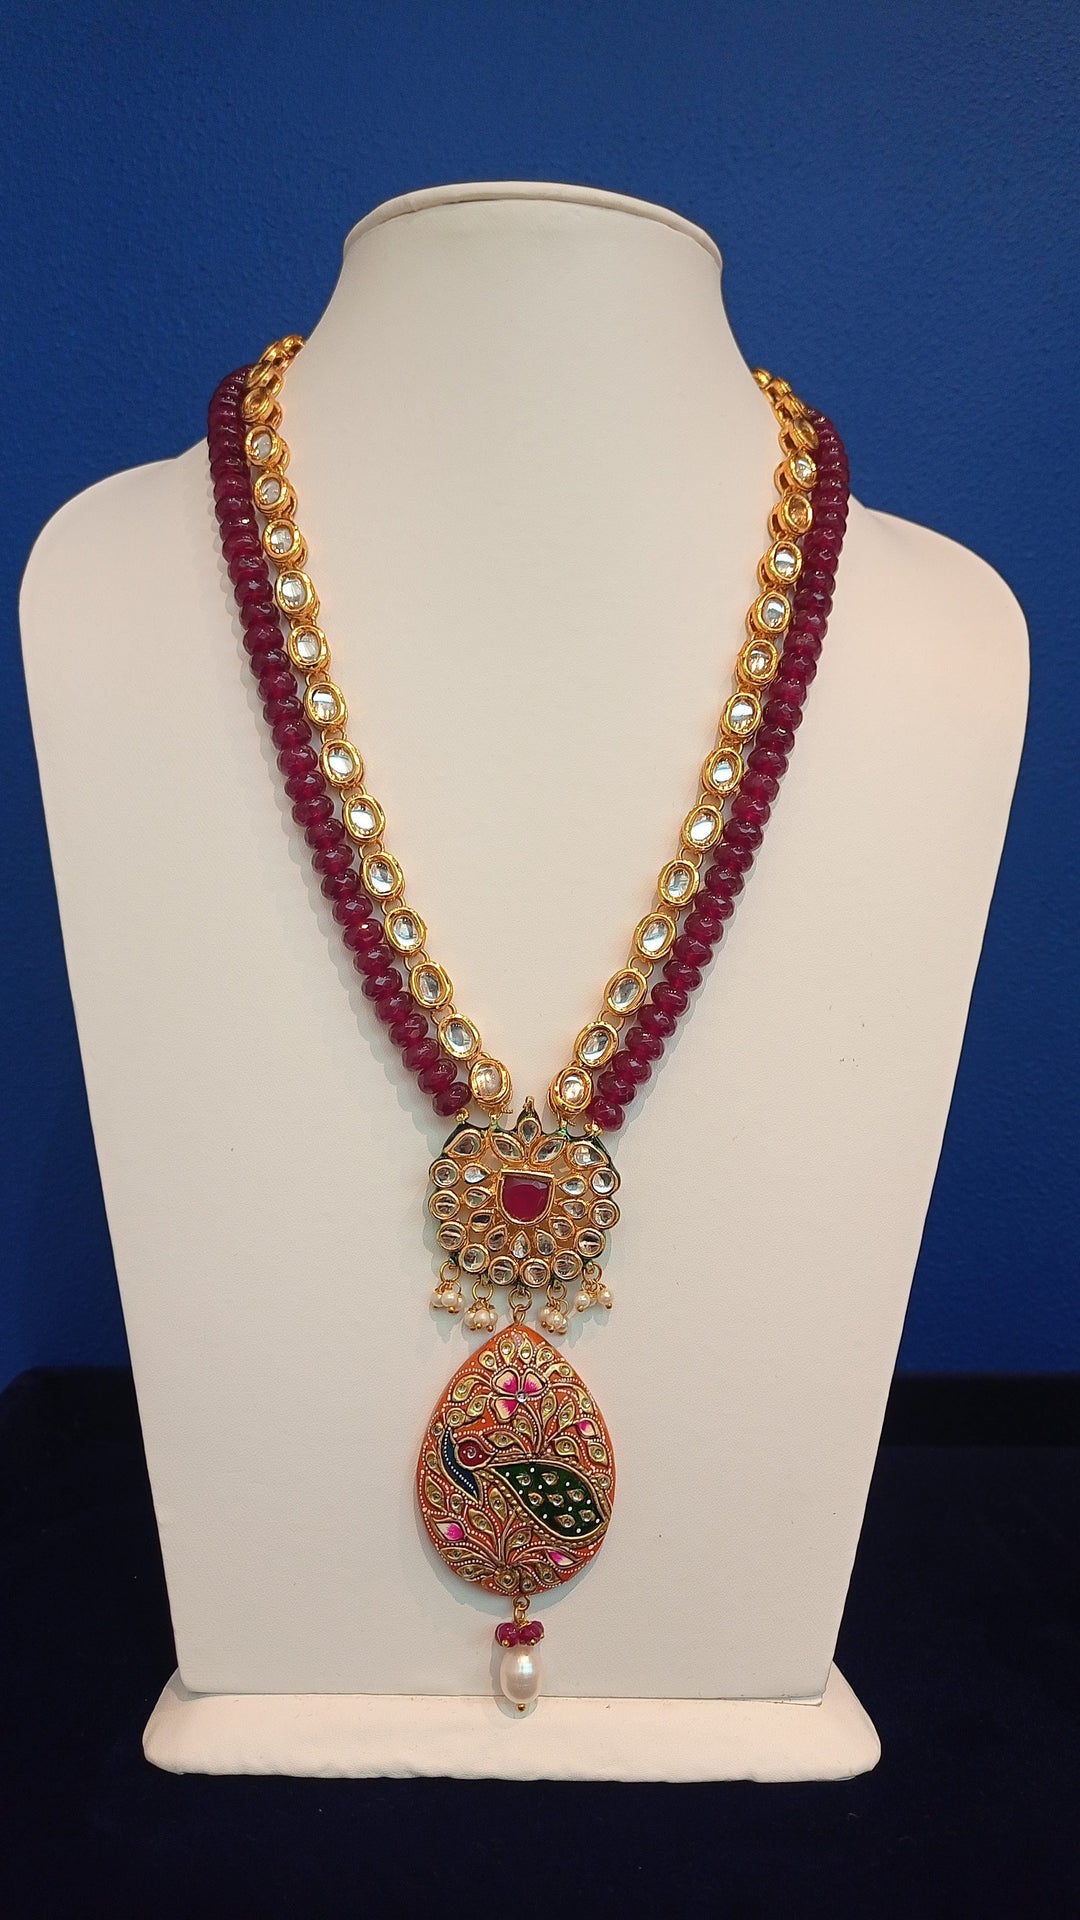 Elanora Maroon and Peach Enamel Pendant Necklace and Earrings Set with Beads